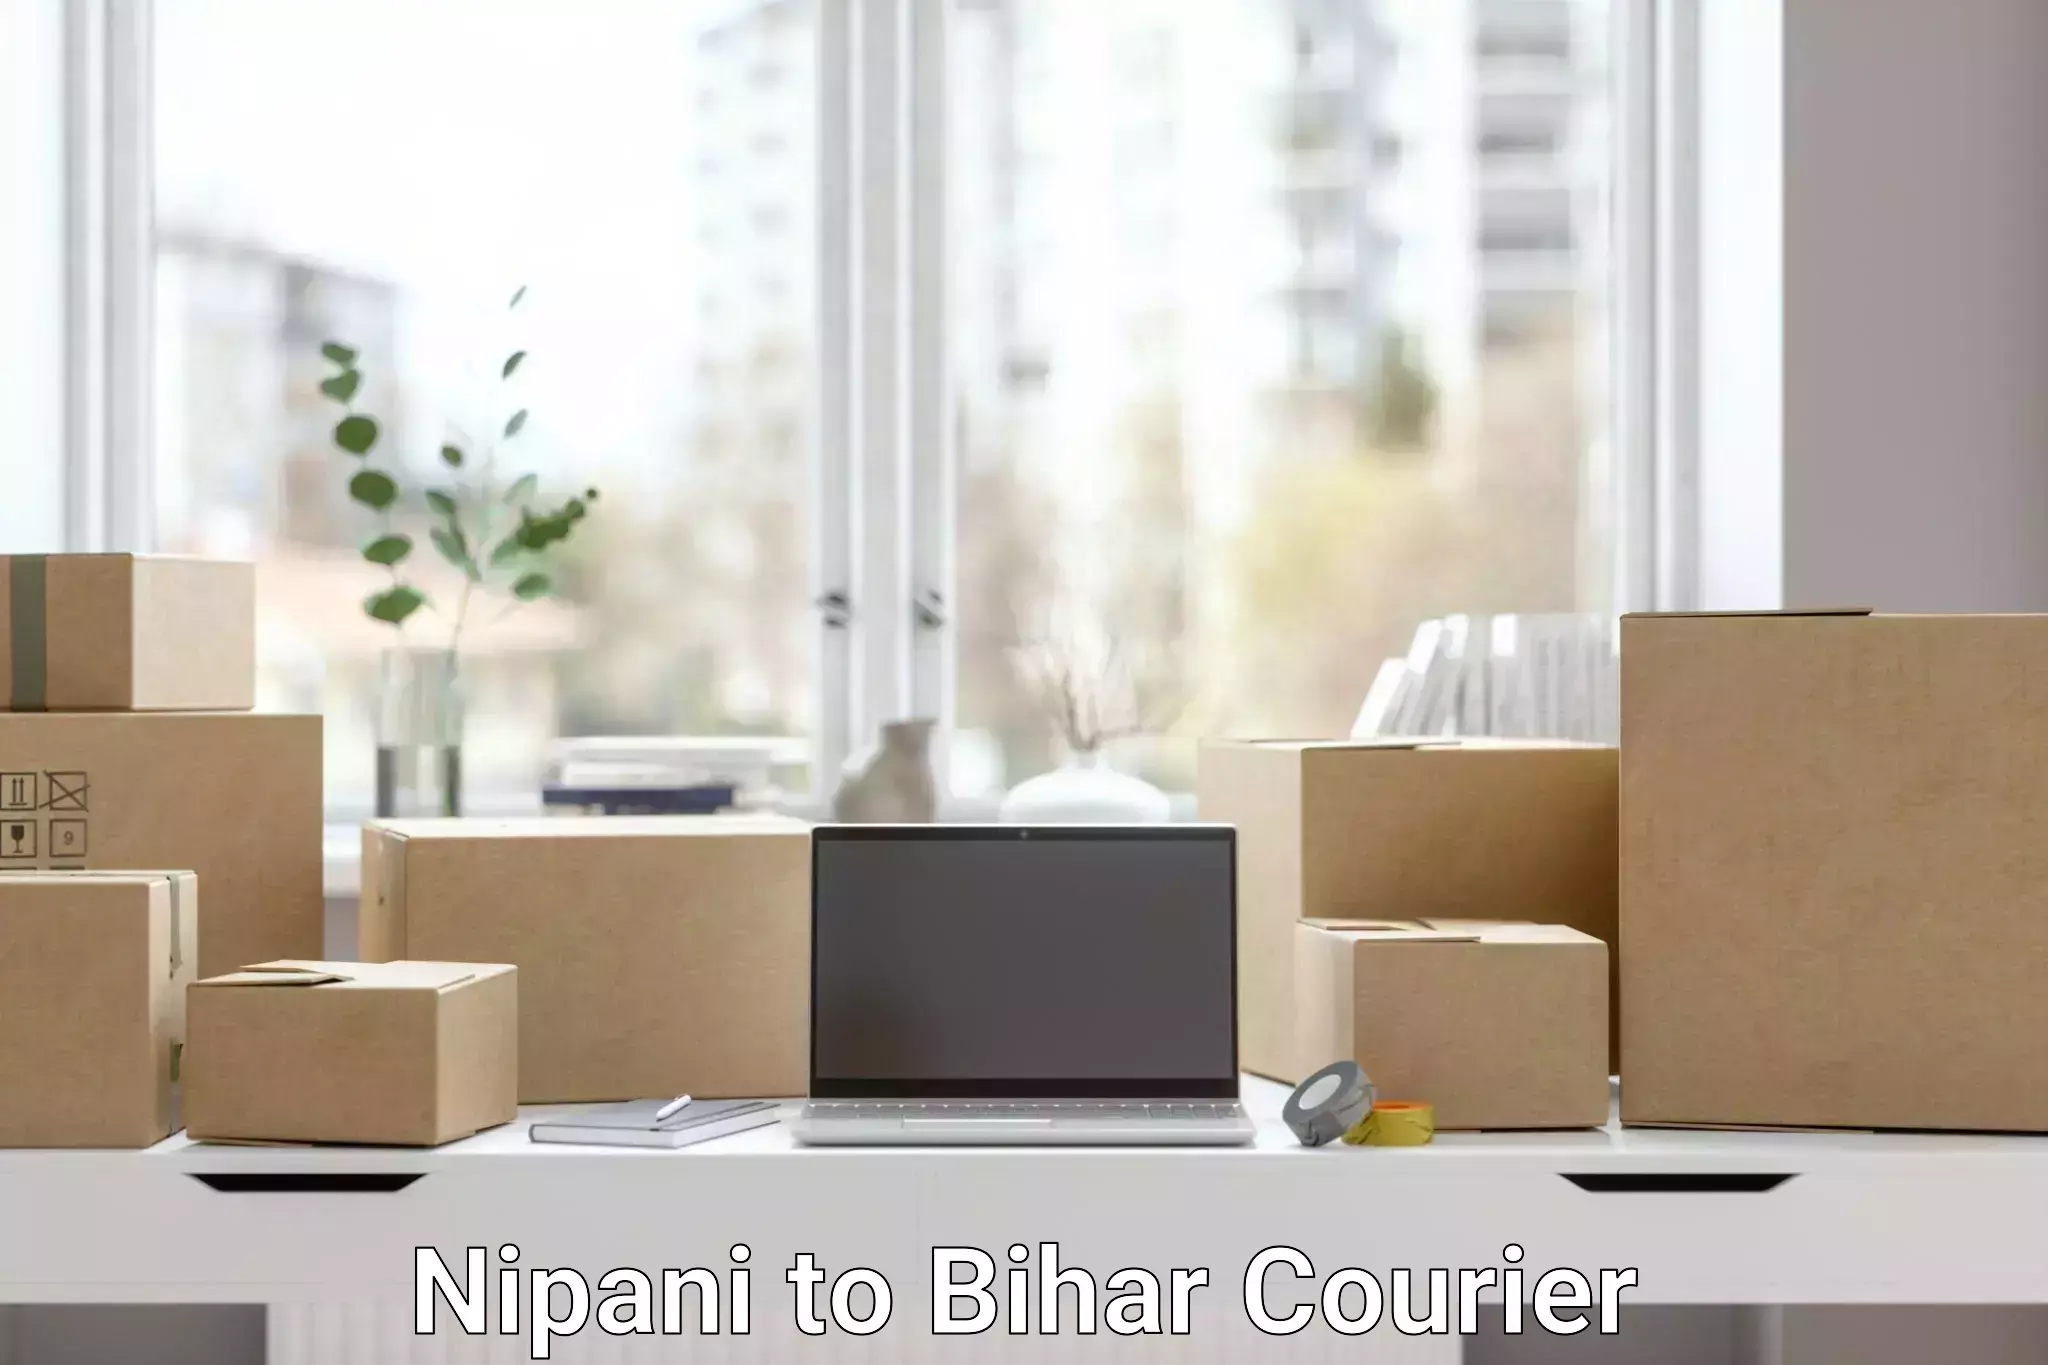 State-of-the-art courier technology in Nipani to Aurangabad Bihar